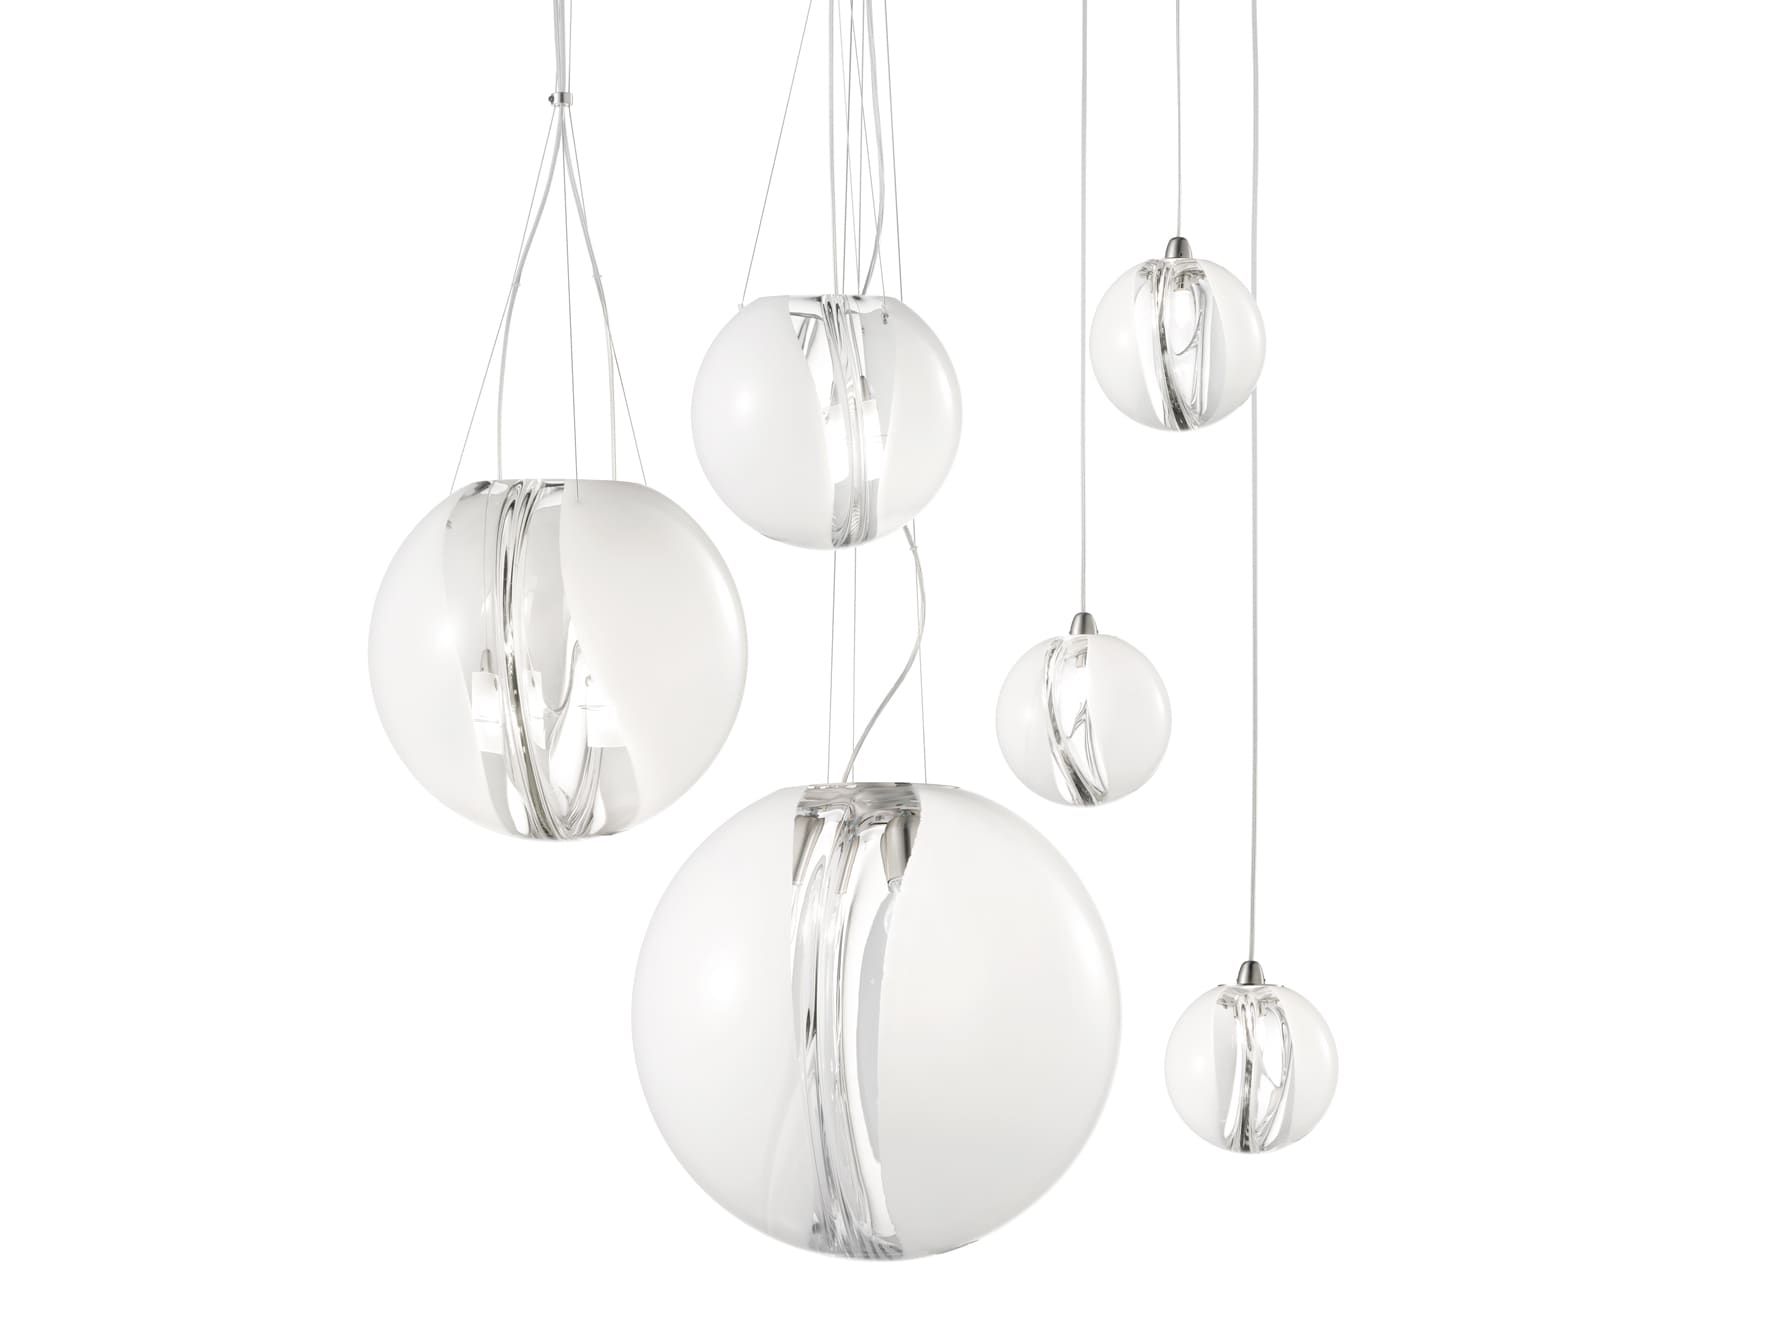 Poc modern luxury hanging light with white glass